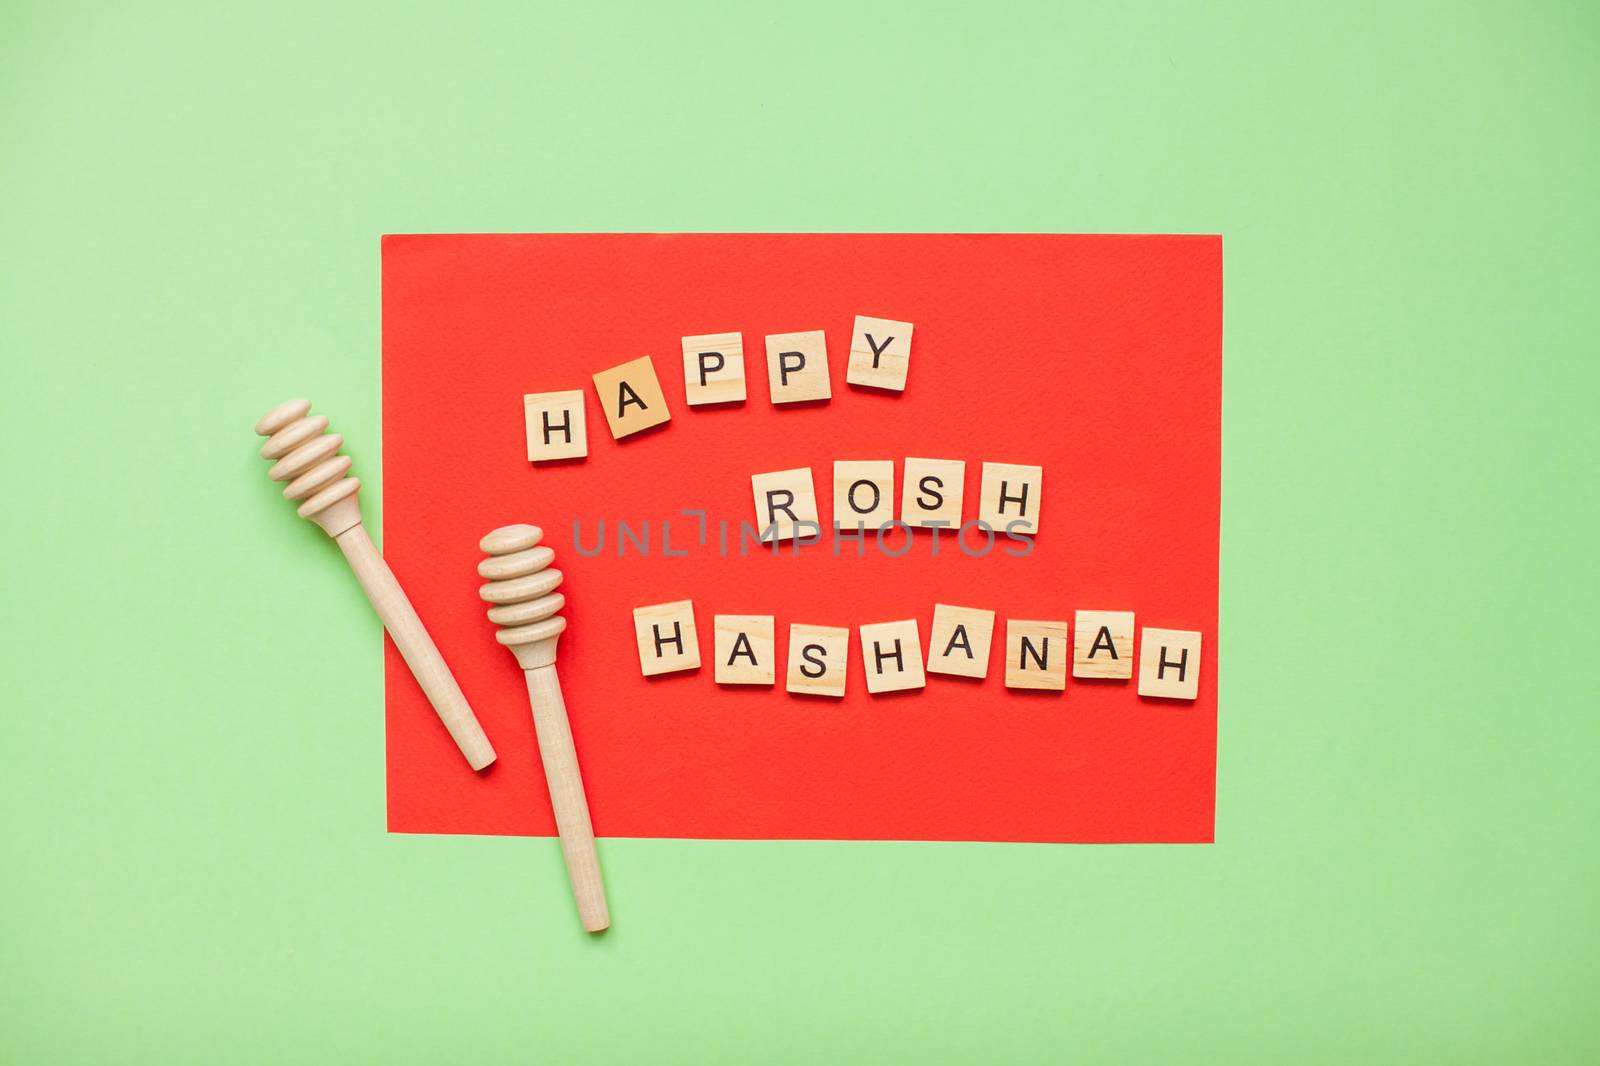 Words from wooden blocks 'happy rosh hashanah' and wooden spoons for honey by malyshkamju